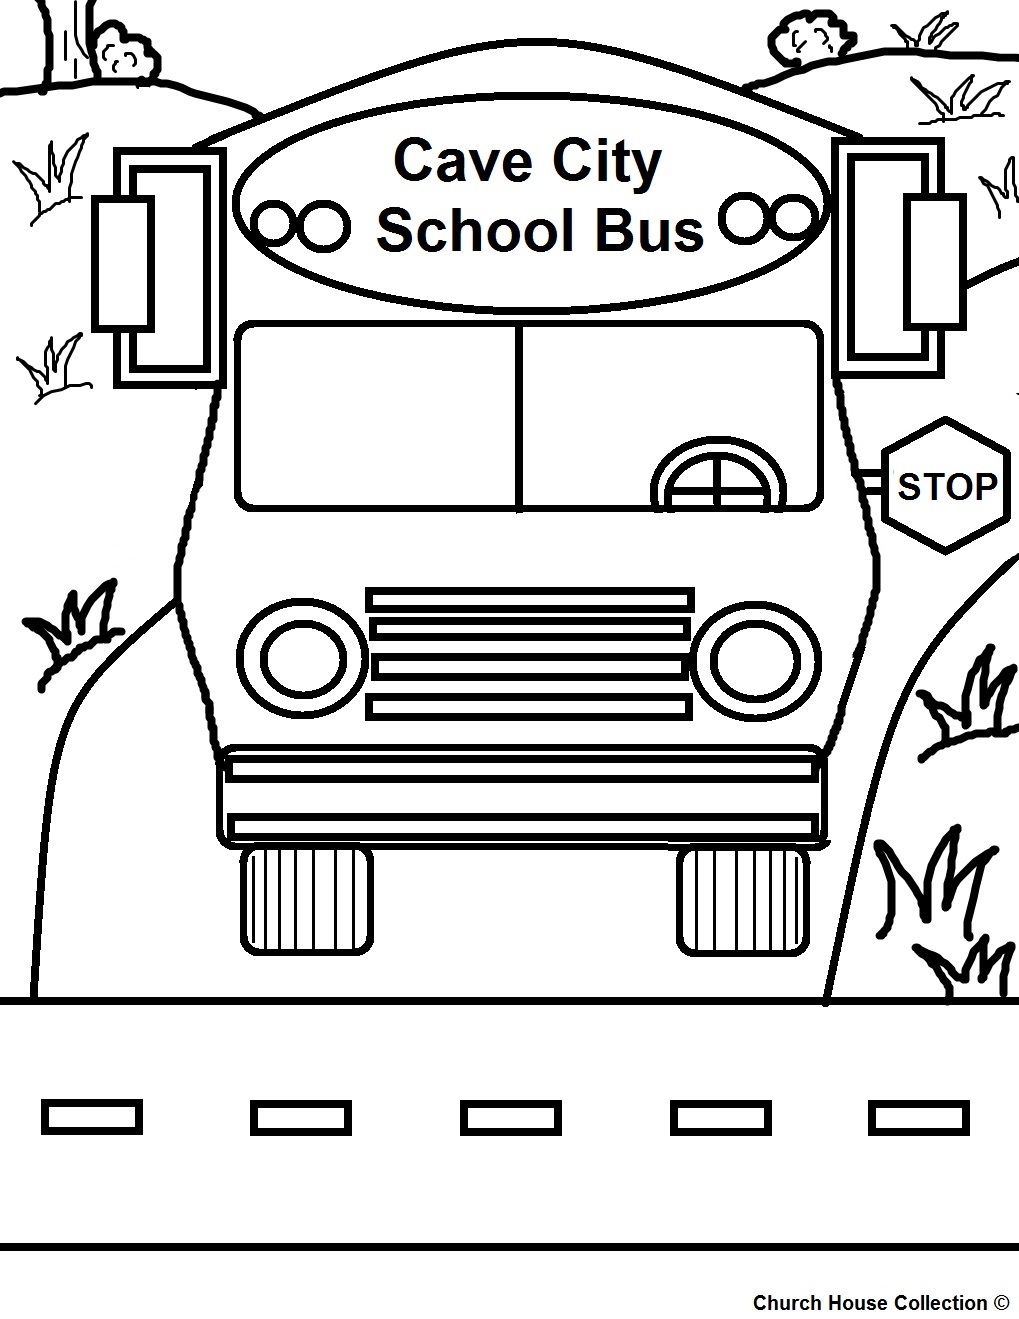  School House coloring pages, Coloring for kids, Cave city, school bus